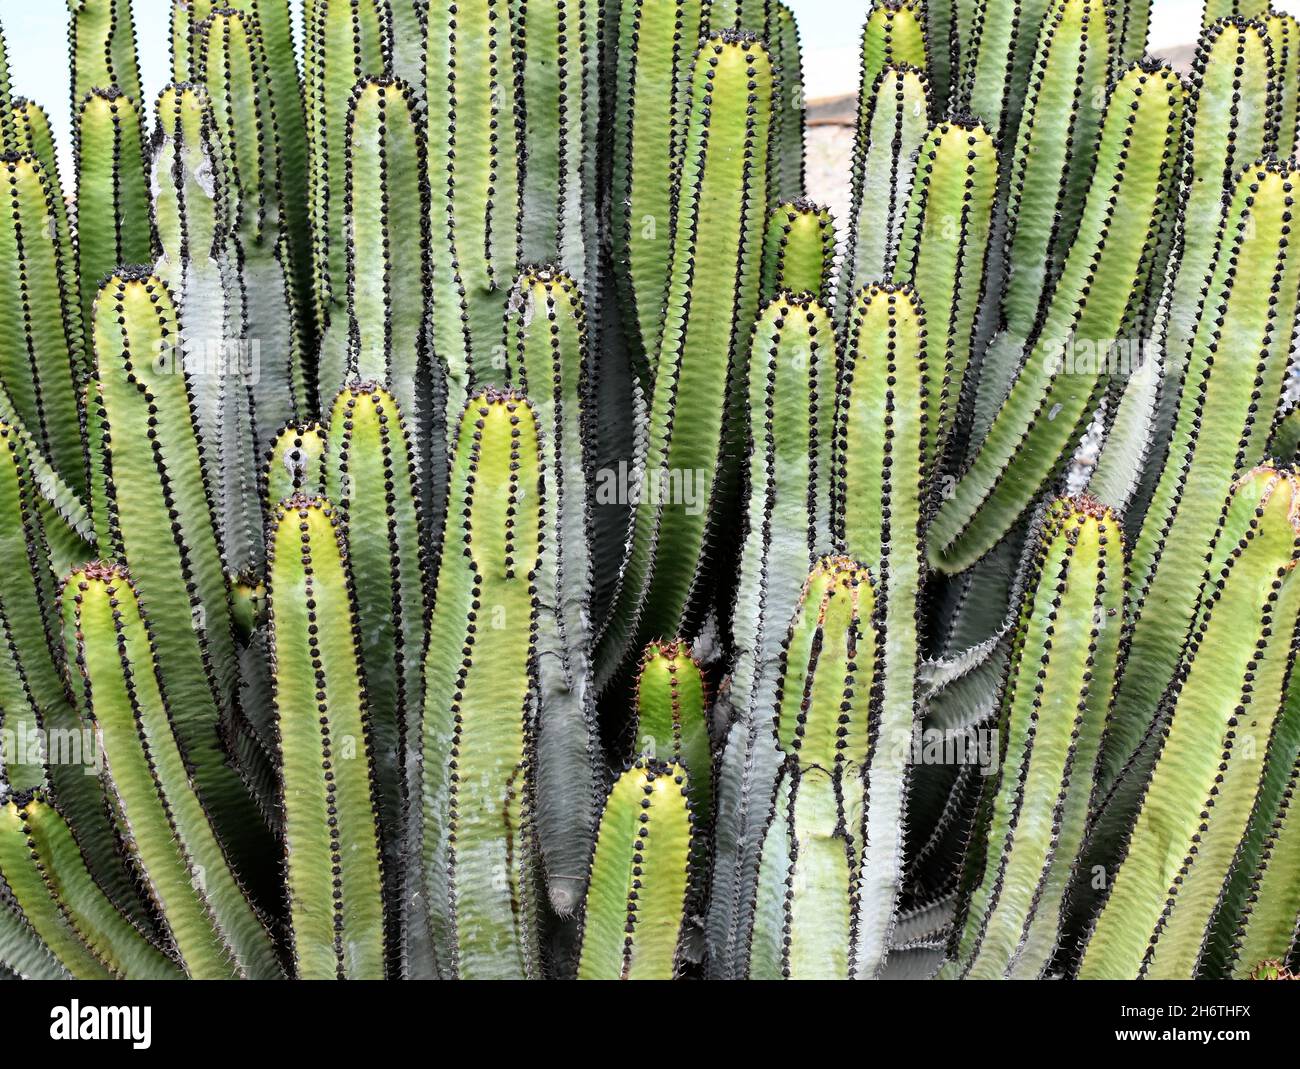 Canary Island Euphorbia canariensis spurge succulent growing close together Stock Photo